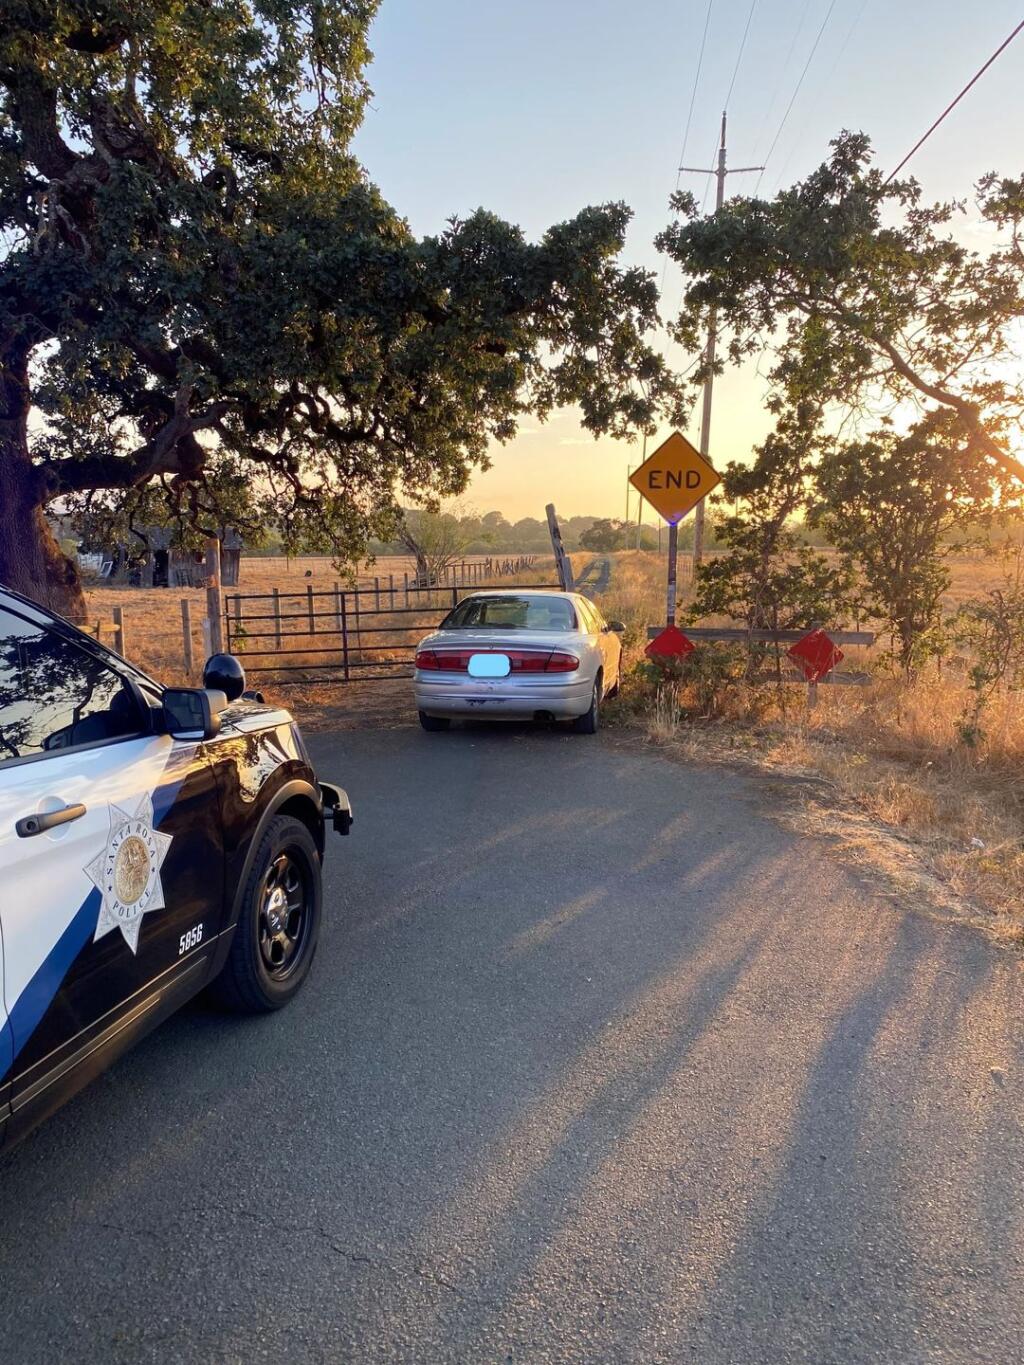 An assault suspect was arrested after an 8-miles vehicle pursuit from Santa Rosa to Rohnert Park, Wednesday, July 28, 2021. (Santa Rosa Police Department / Facebook)